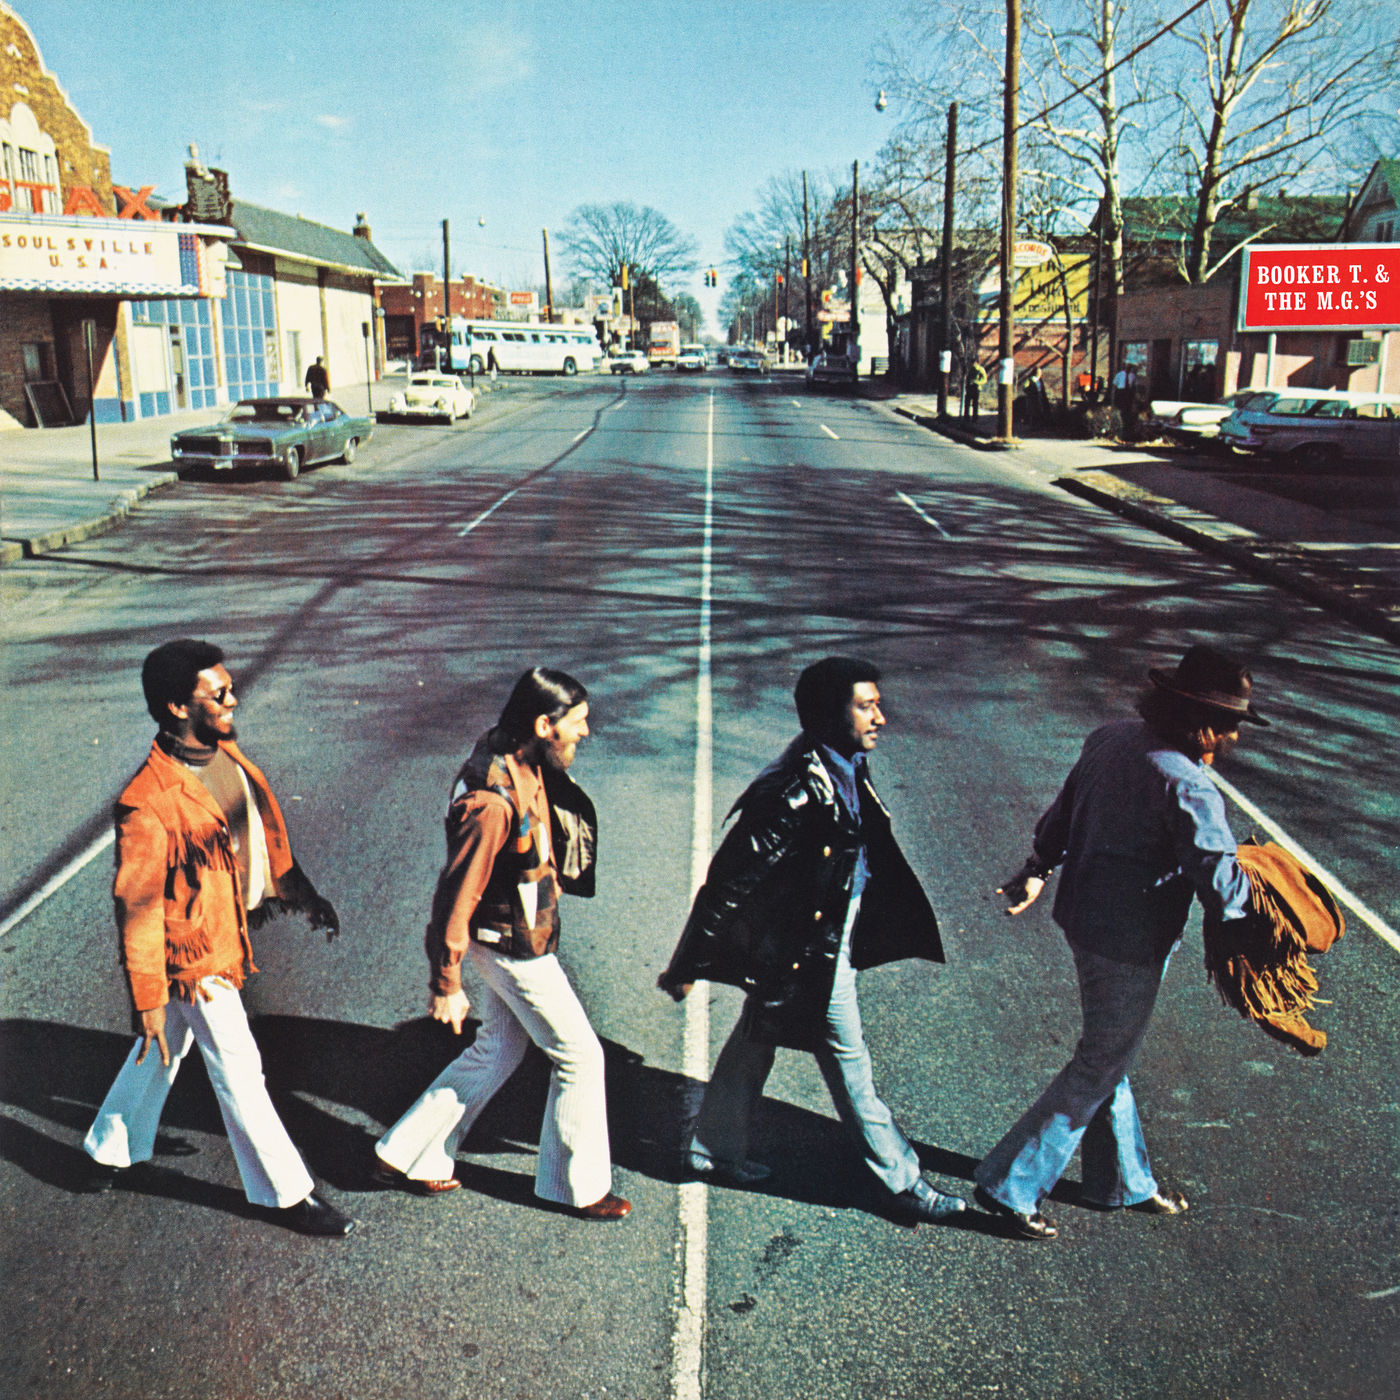 Booker T. & The M.G.’s - McLemore Avenue (Remastered) (1970/2020) [FLAC 24bit/192kHz]